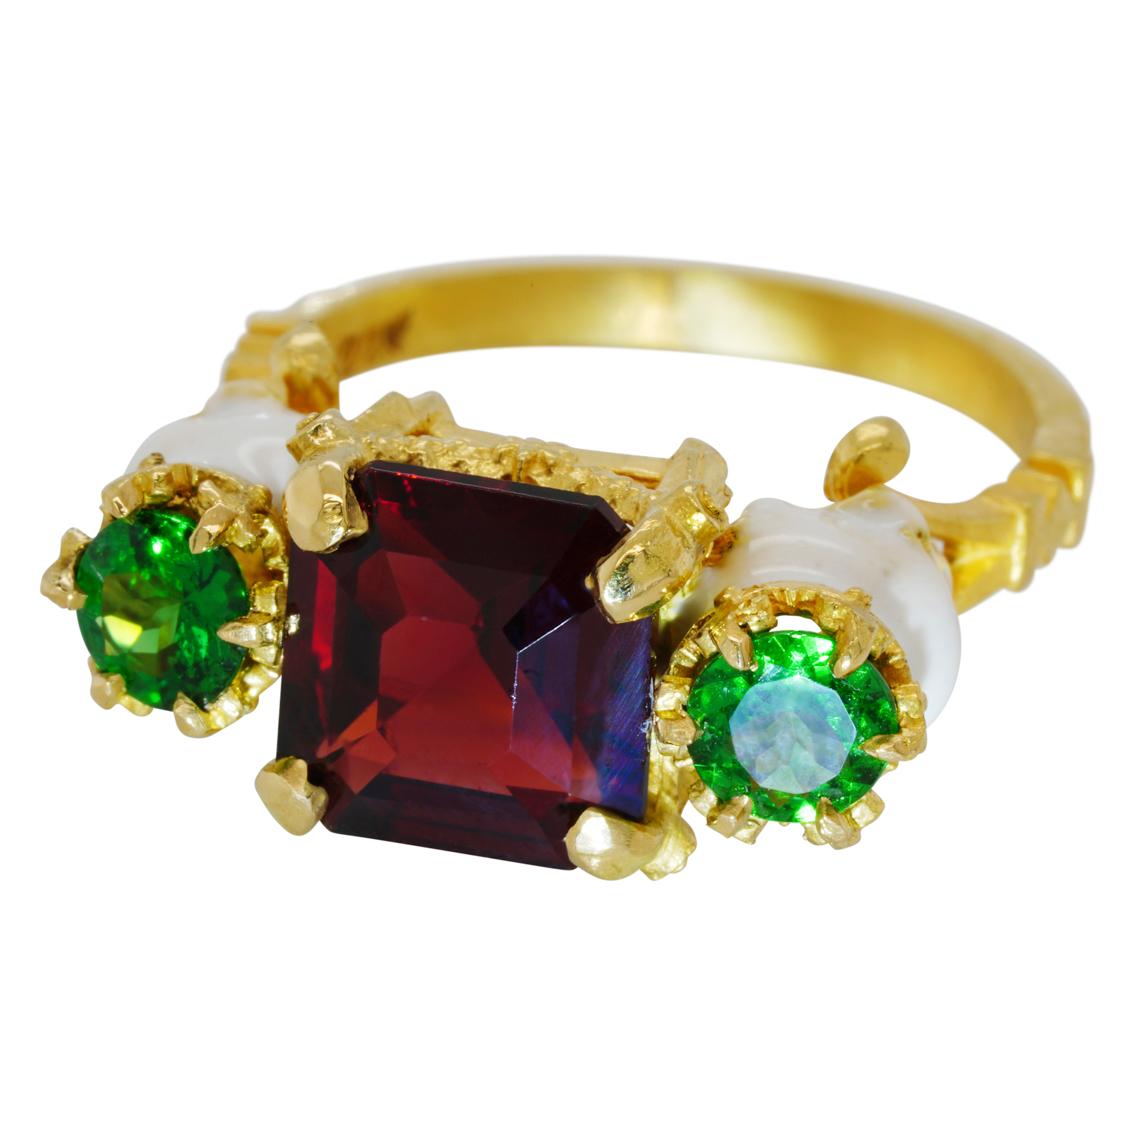 Catacomb Saints Garland Ring in 22 Karat Gold with Red and Tsavorite Garnets 3